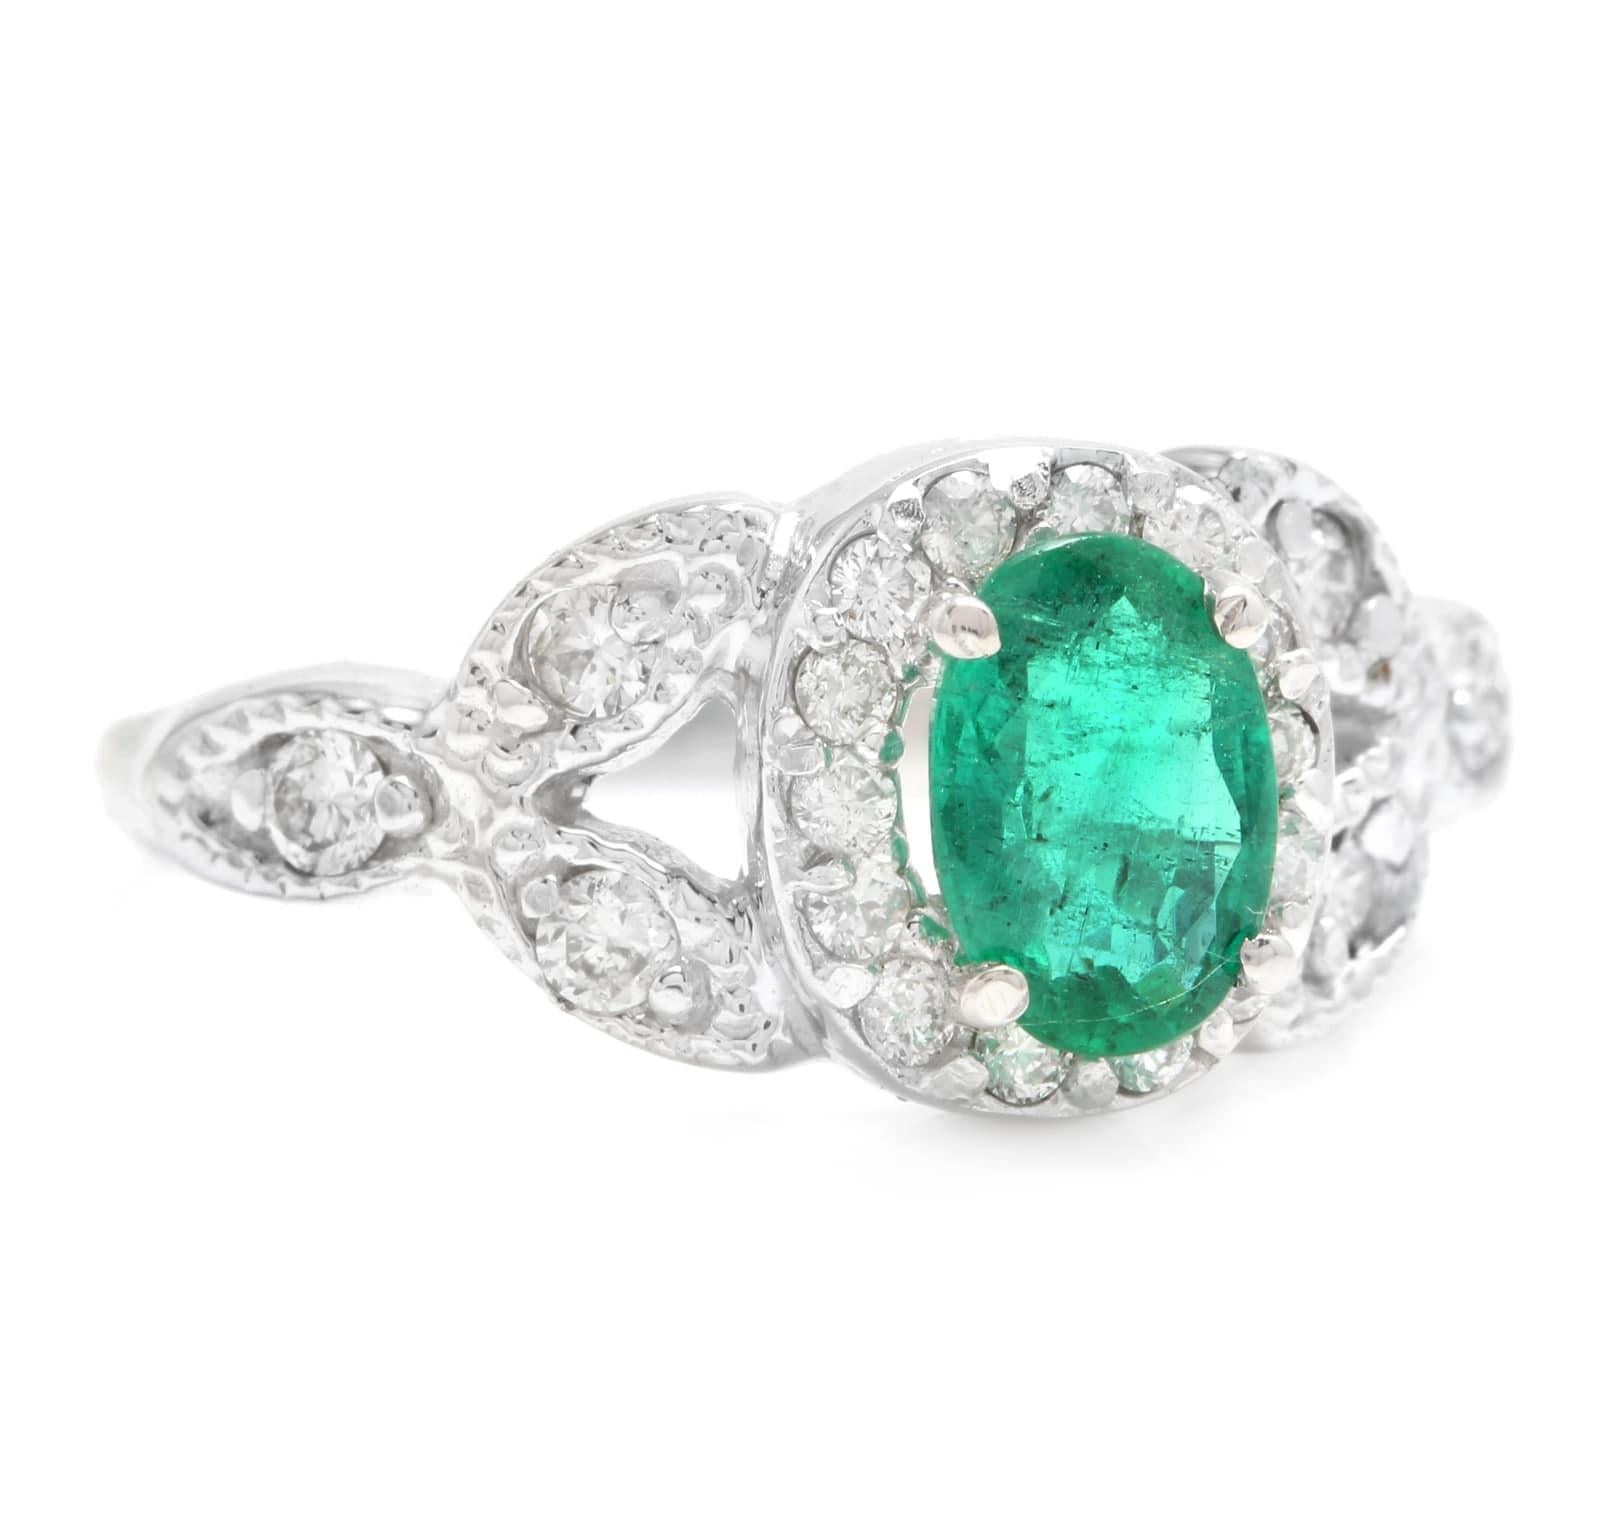 1.15 Carats Natural Emerald and Diamond 14K Solid White Gold Ring

Total Natural Green Emerald Weight is: Approx. 0.80 Carats (transparent)

Emerald Measures: Approx. 6.80 x 4.80mm

Natural Round Diamonds Weight: Approx. 0.35 Carats (color G-H /